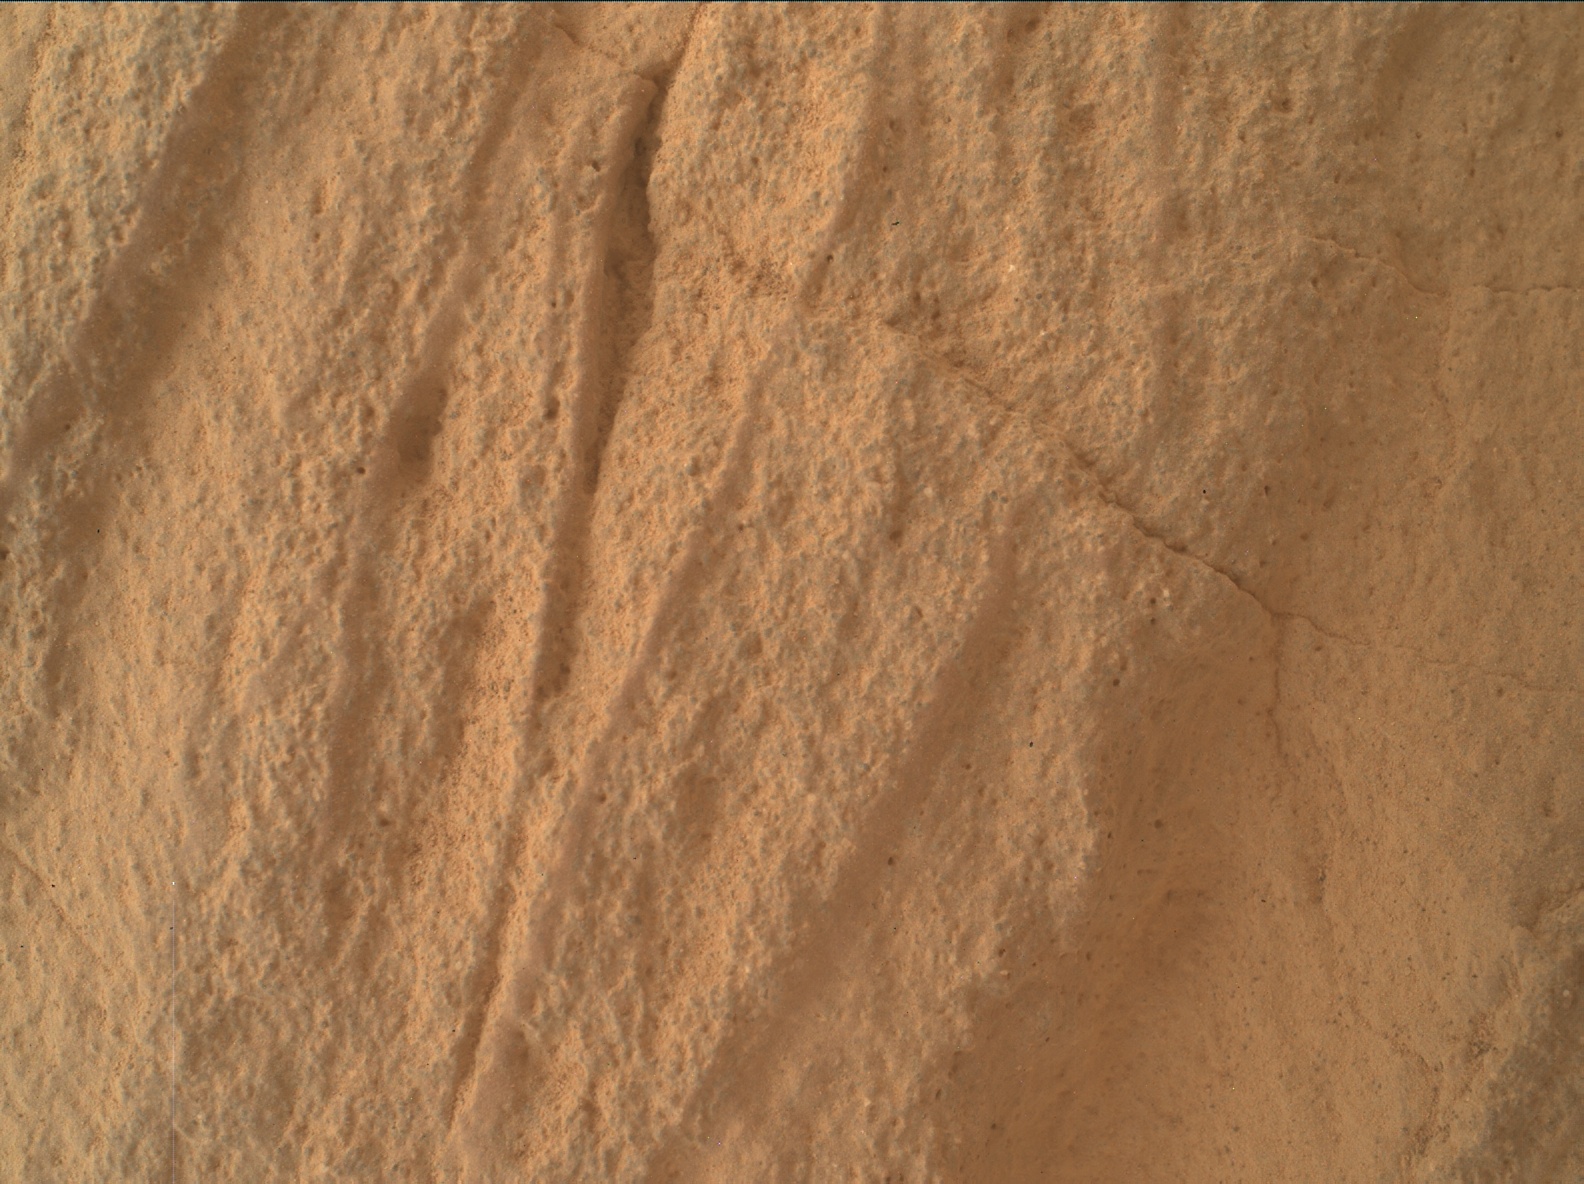 Nasa's Mars rover Curiosity acquired this image using its Mars Hand Lens Imager (MAHLI) on Sol 3376